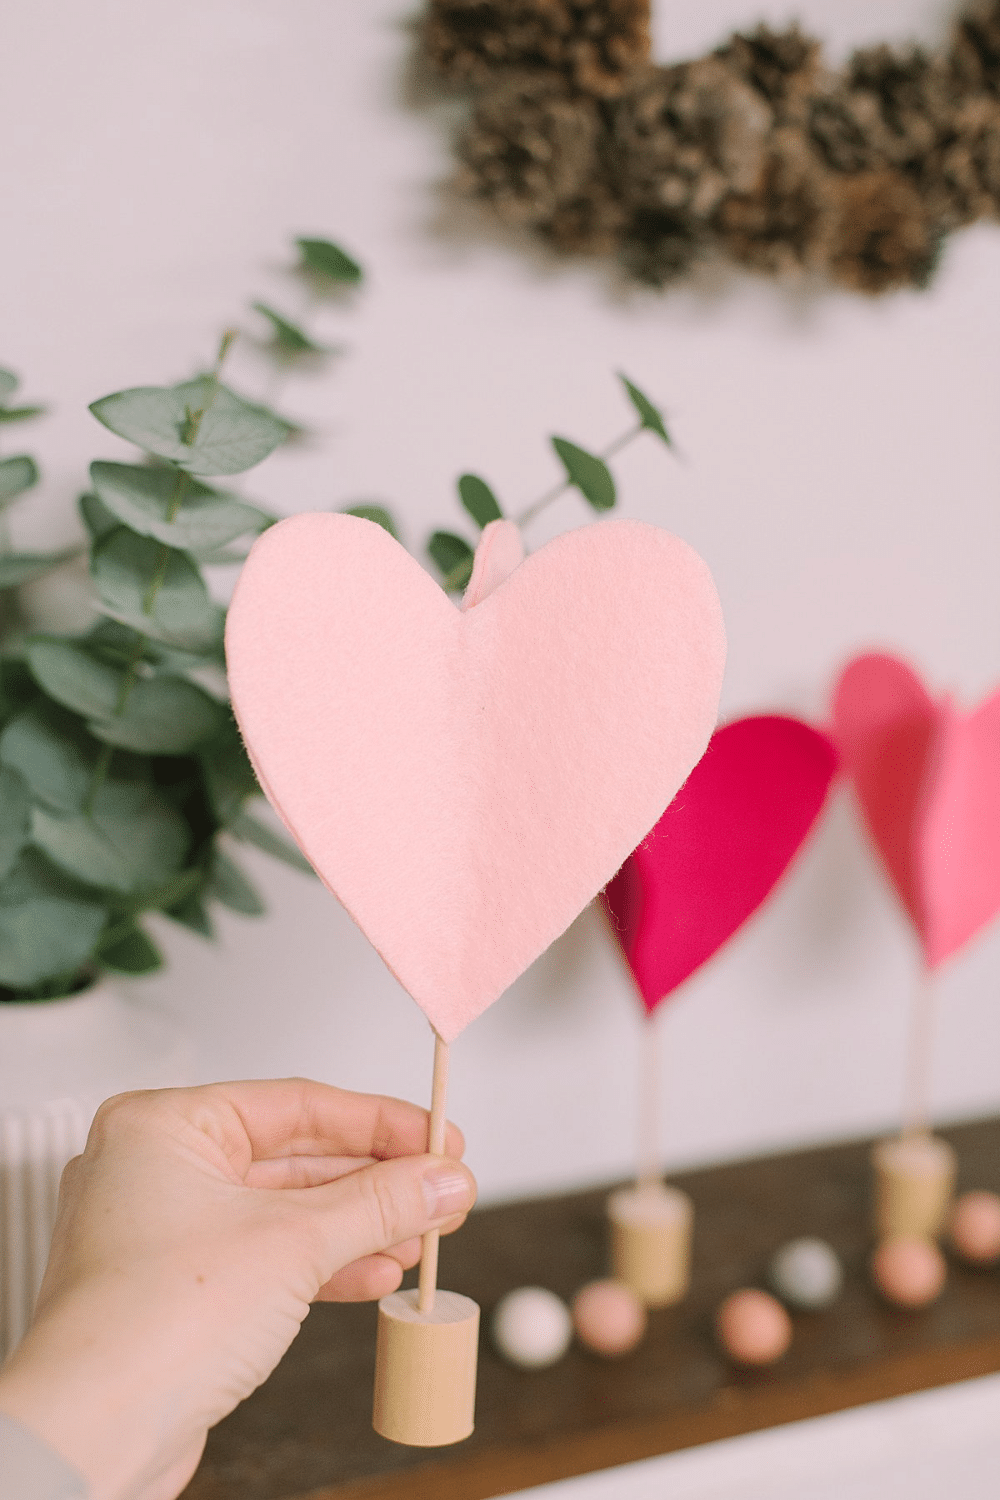 How to Make Felt Hearts for Valentines Day